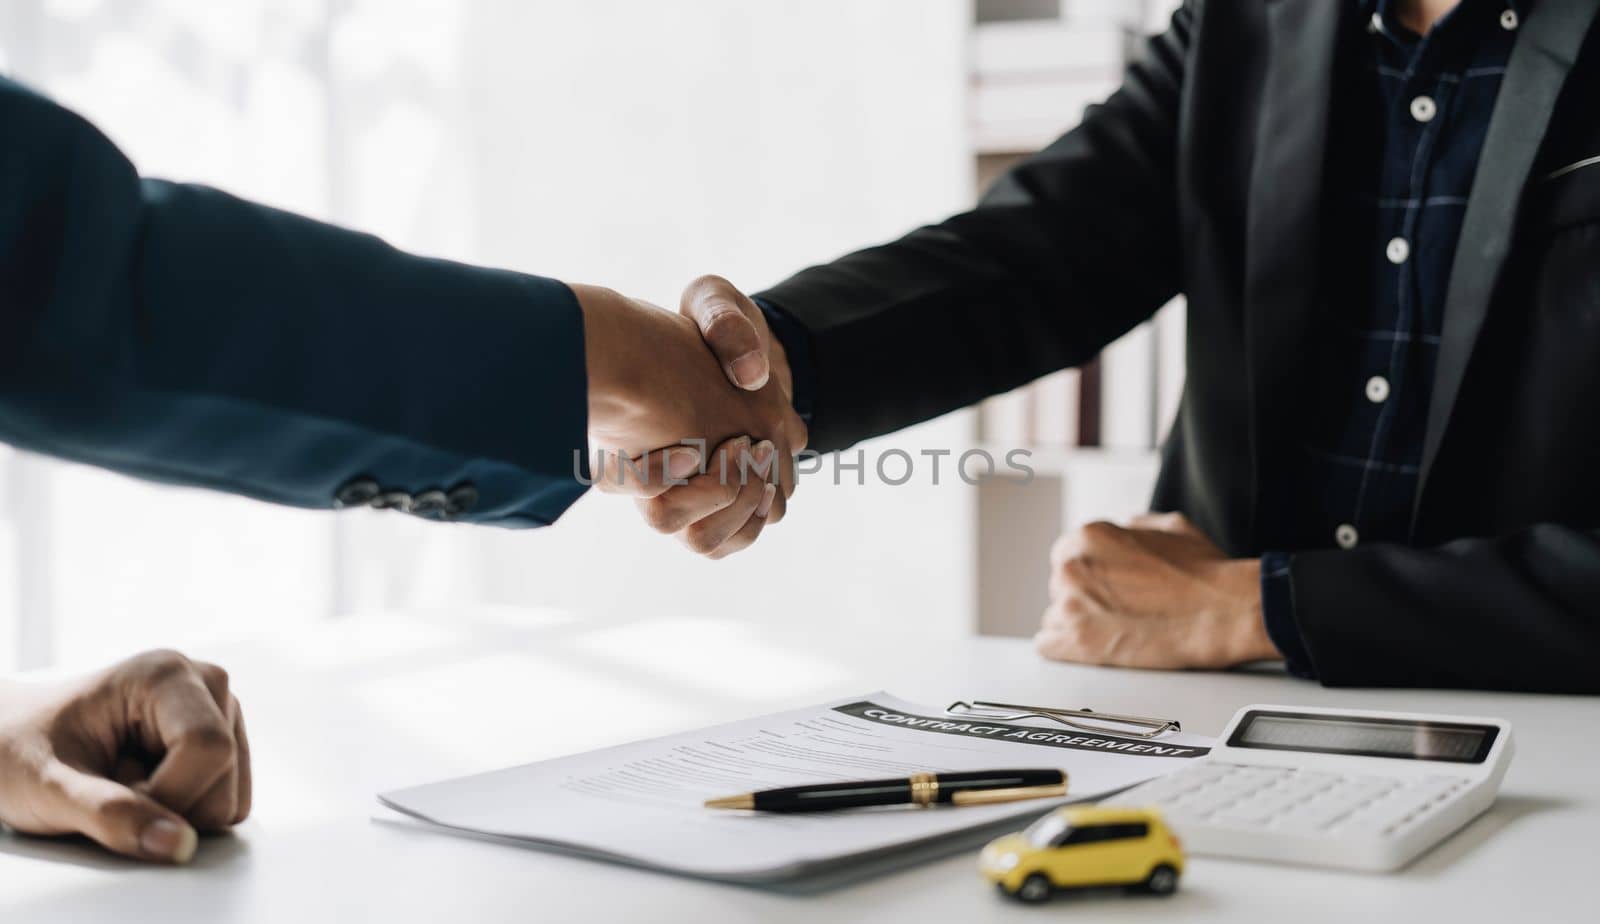 Handshake of cooperation customer and salesman after agreement, successful car loan contract buying or selling new vehicle by wichayada